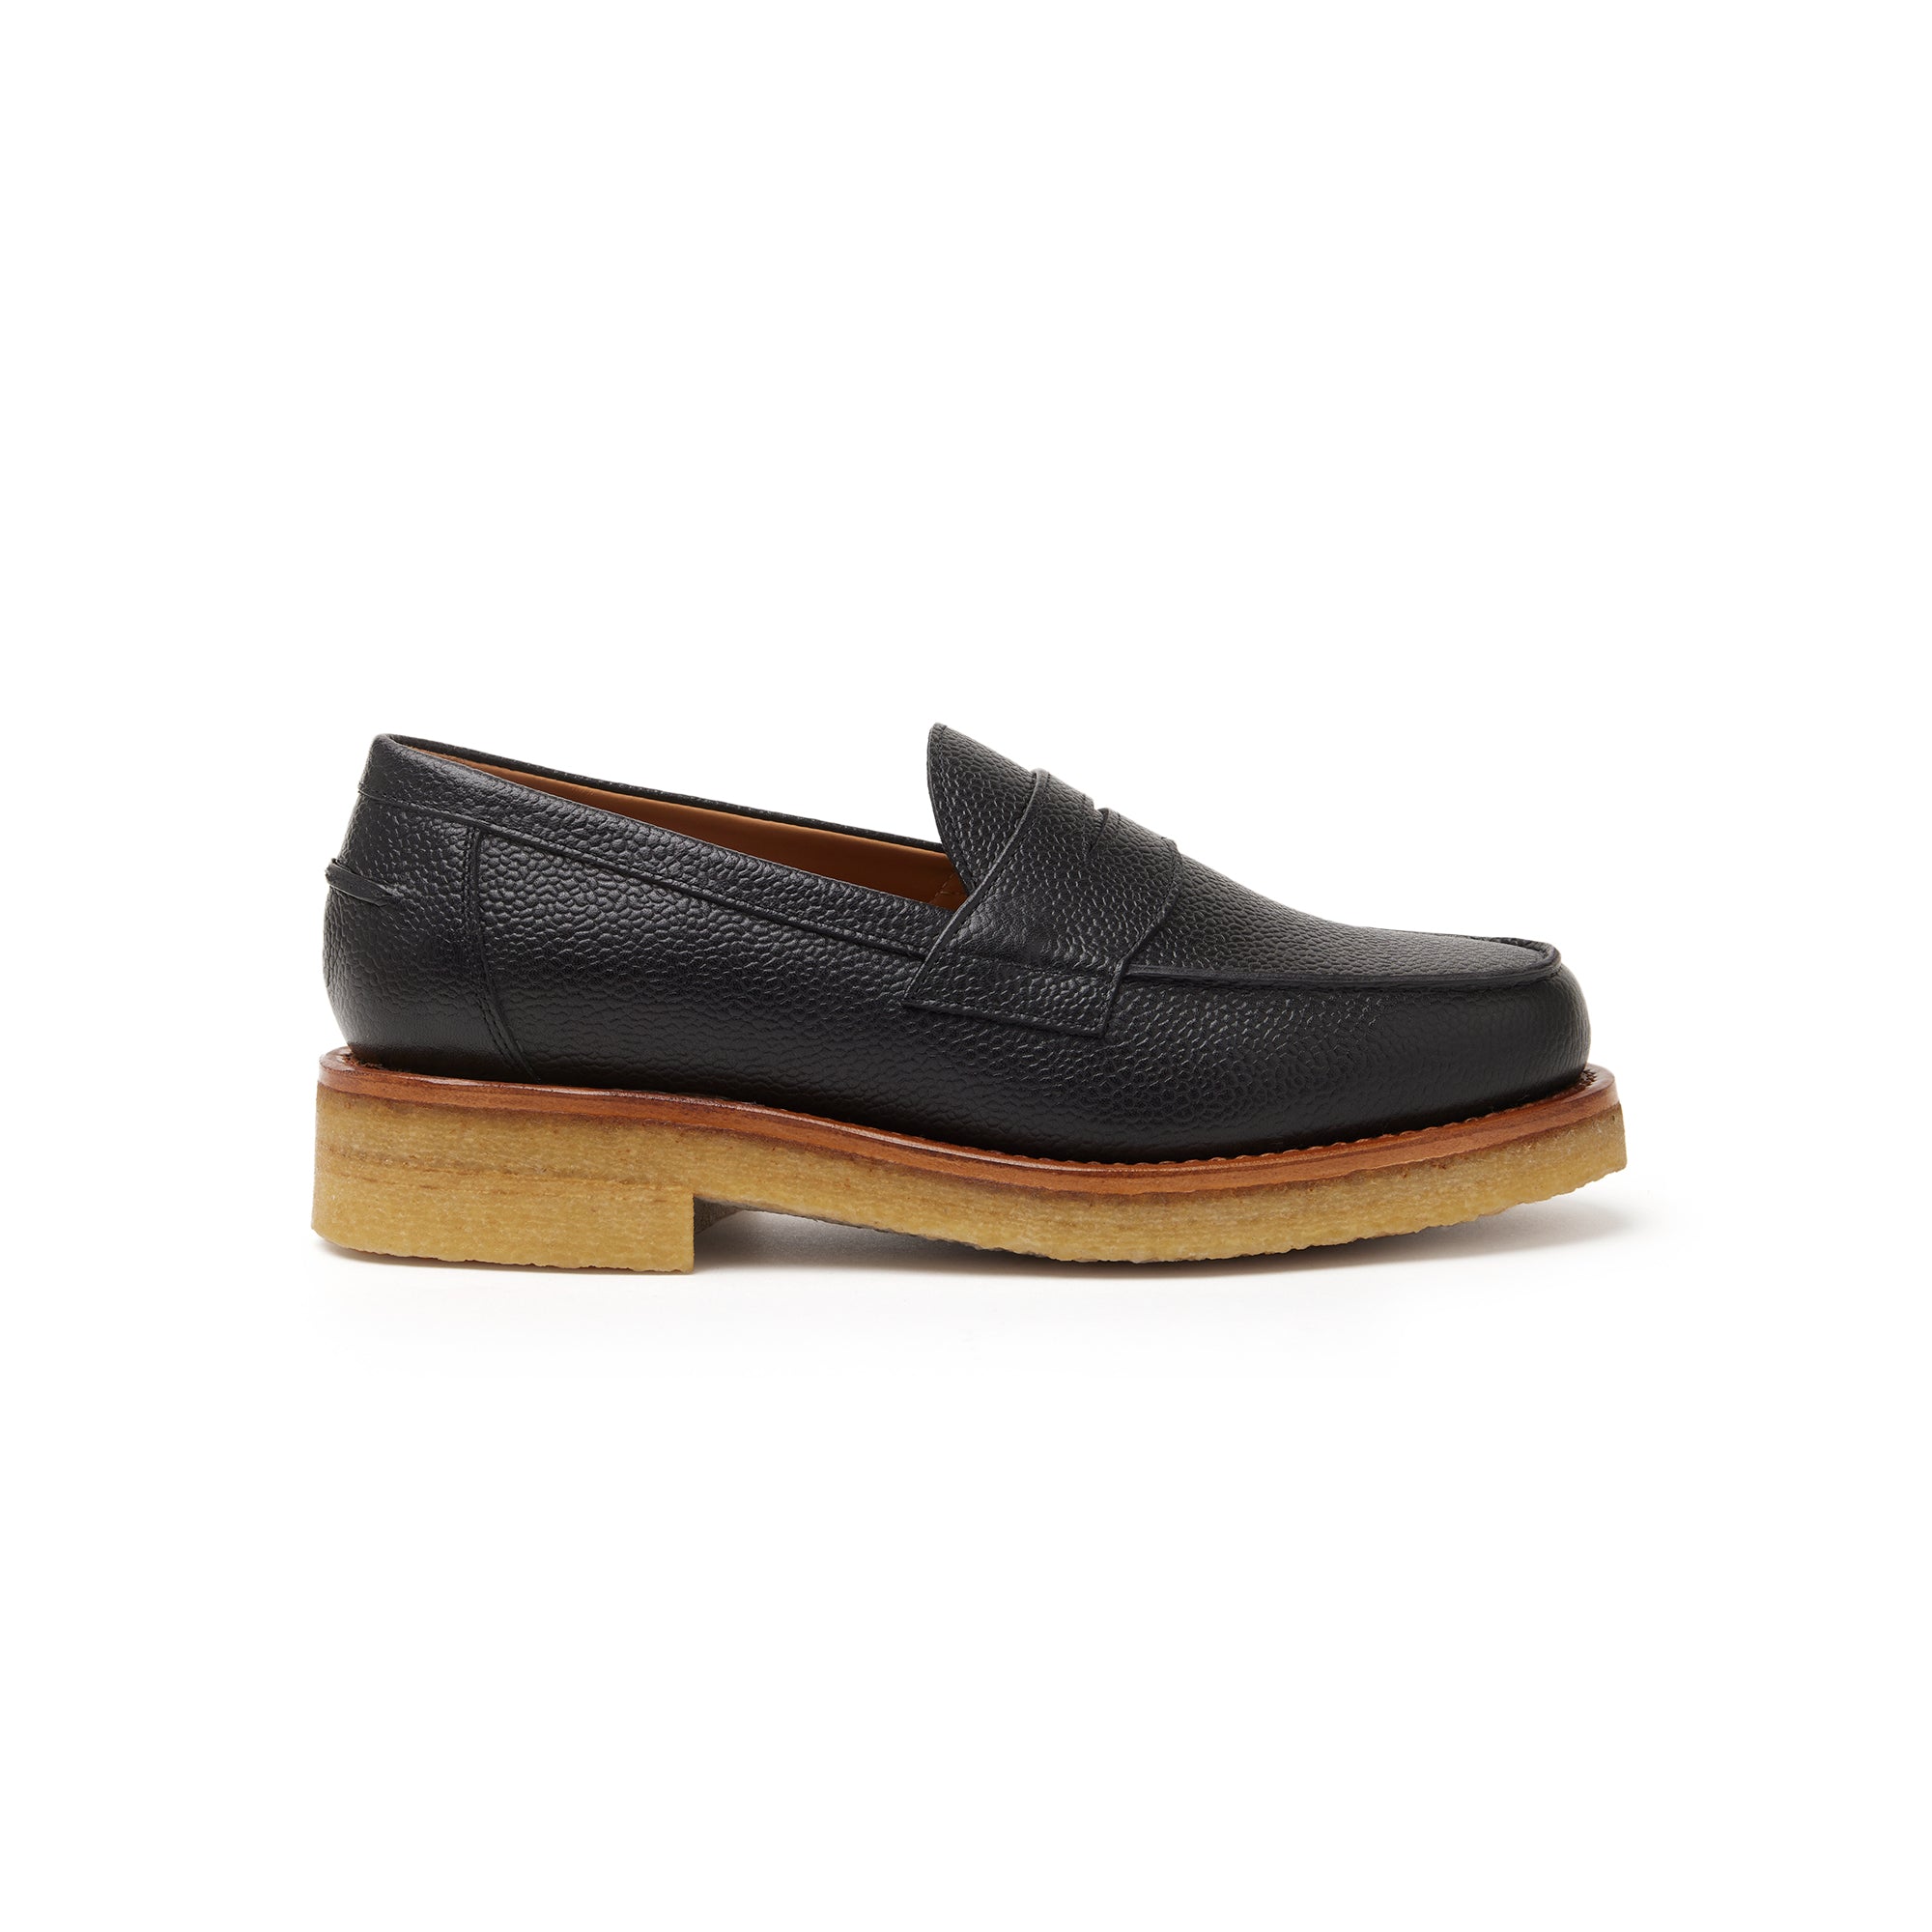 The Ellis Penny Loafer, Onyx, Crepe